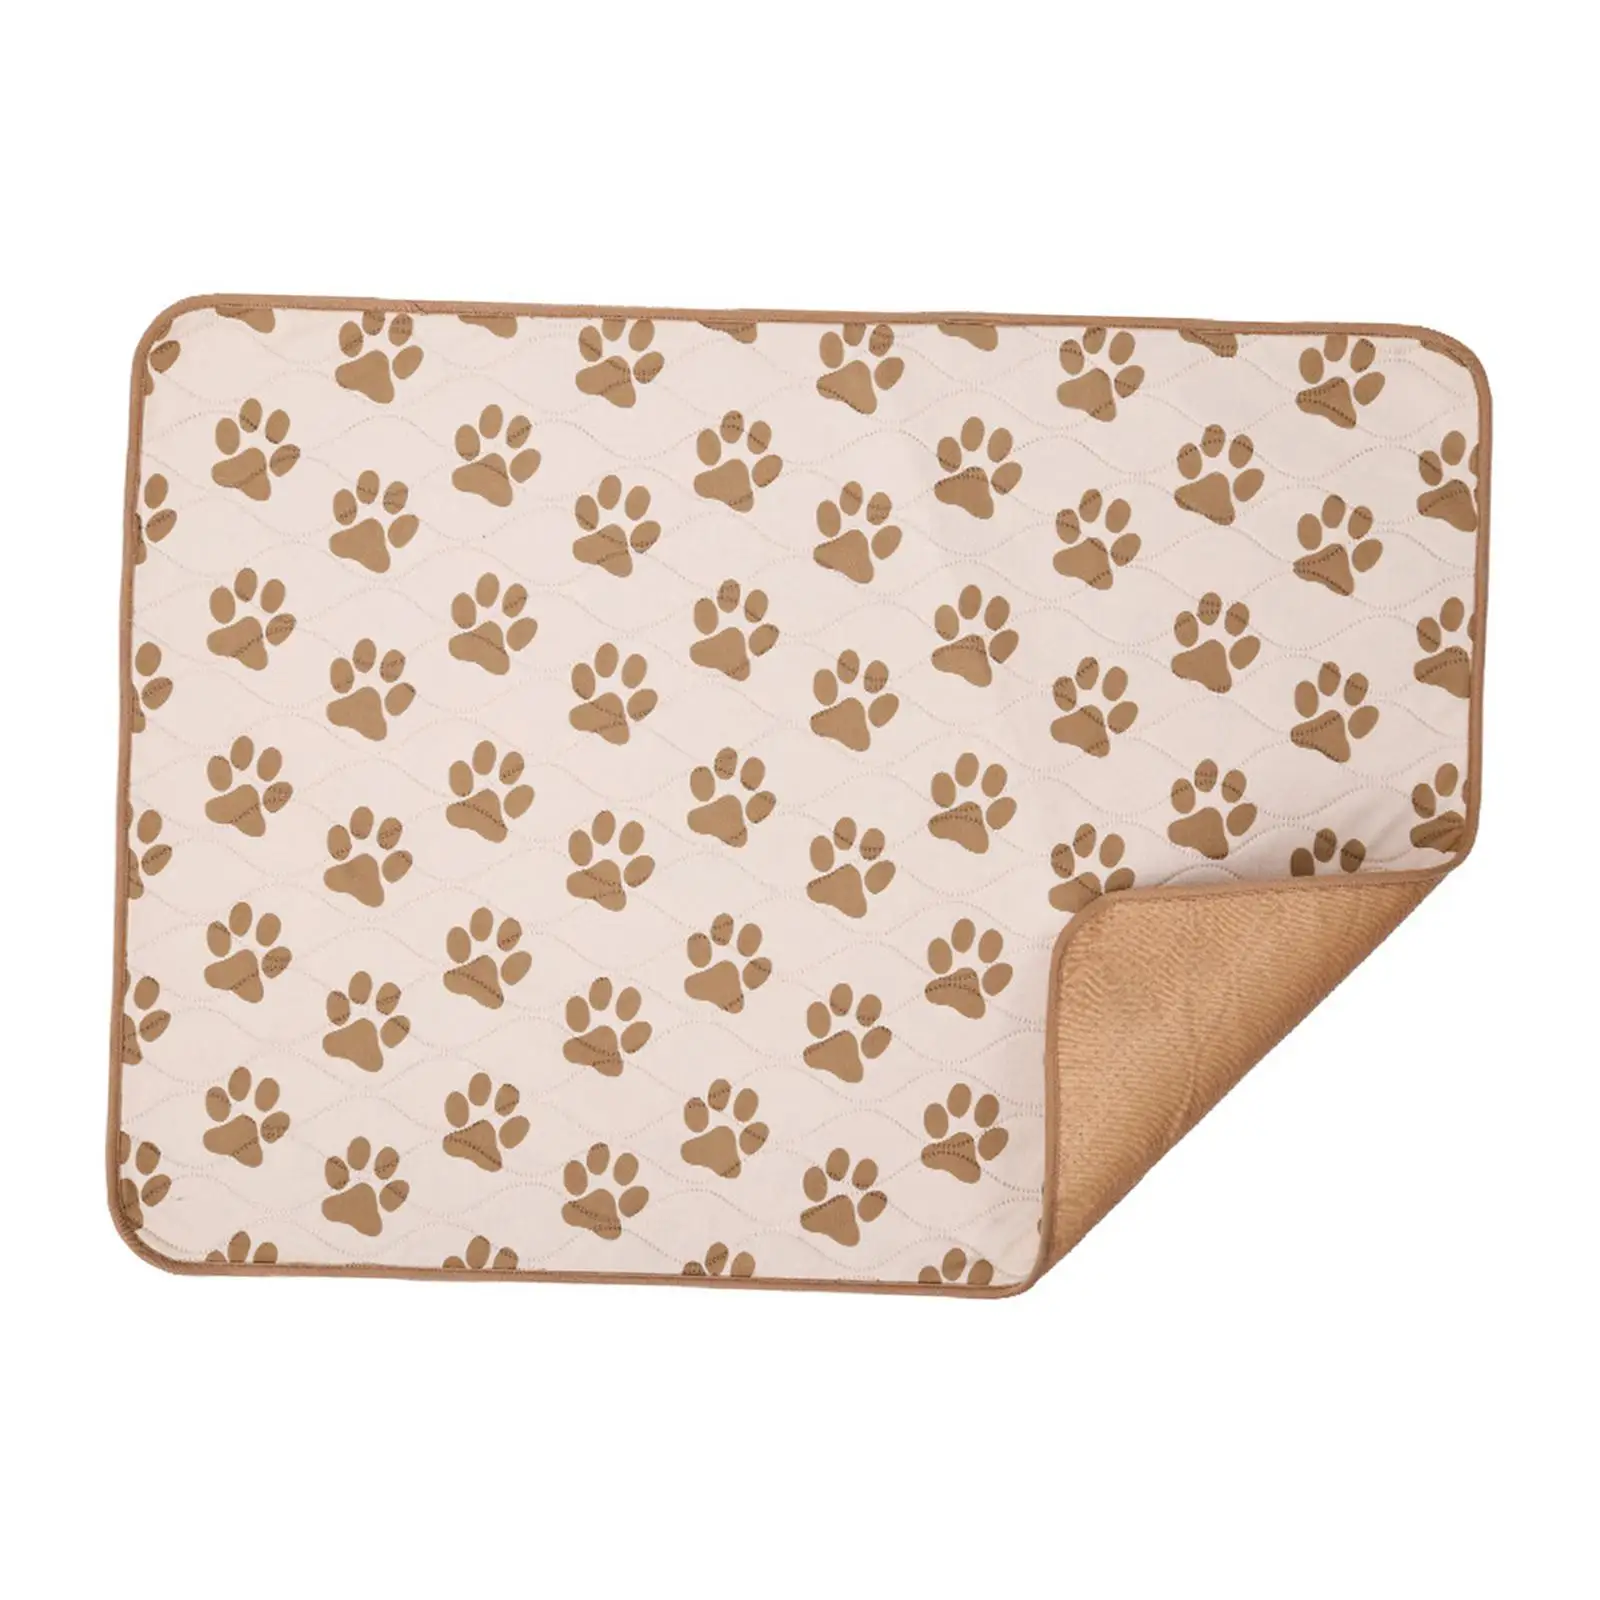 Pet Dog Pee Pad for Puppy Kitten Reusable Washable Cushion Kennel Blanket Mat Bed for Playpen Crate Cage Supplies Home Travel